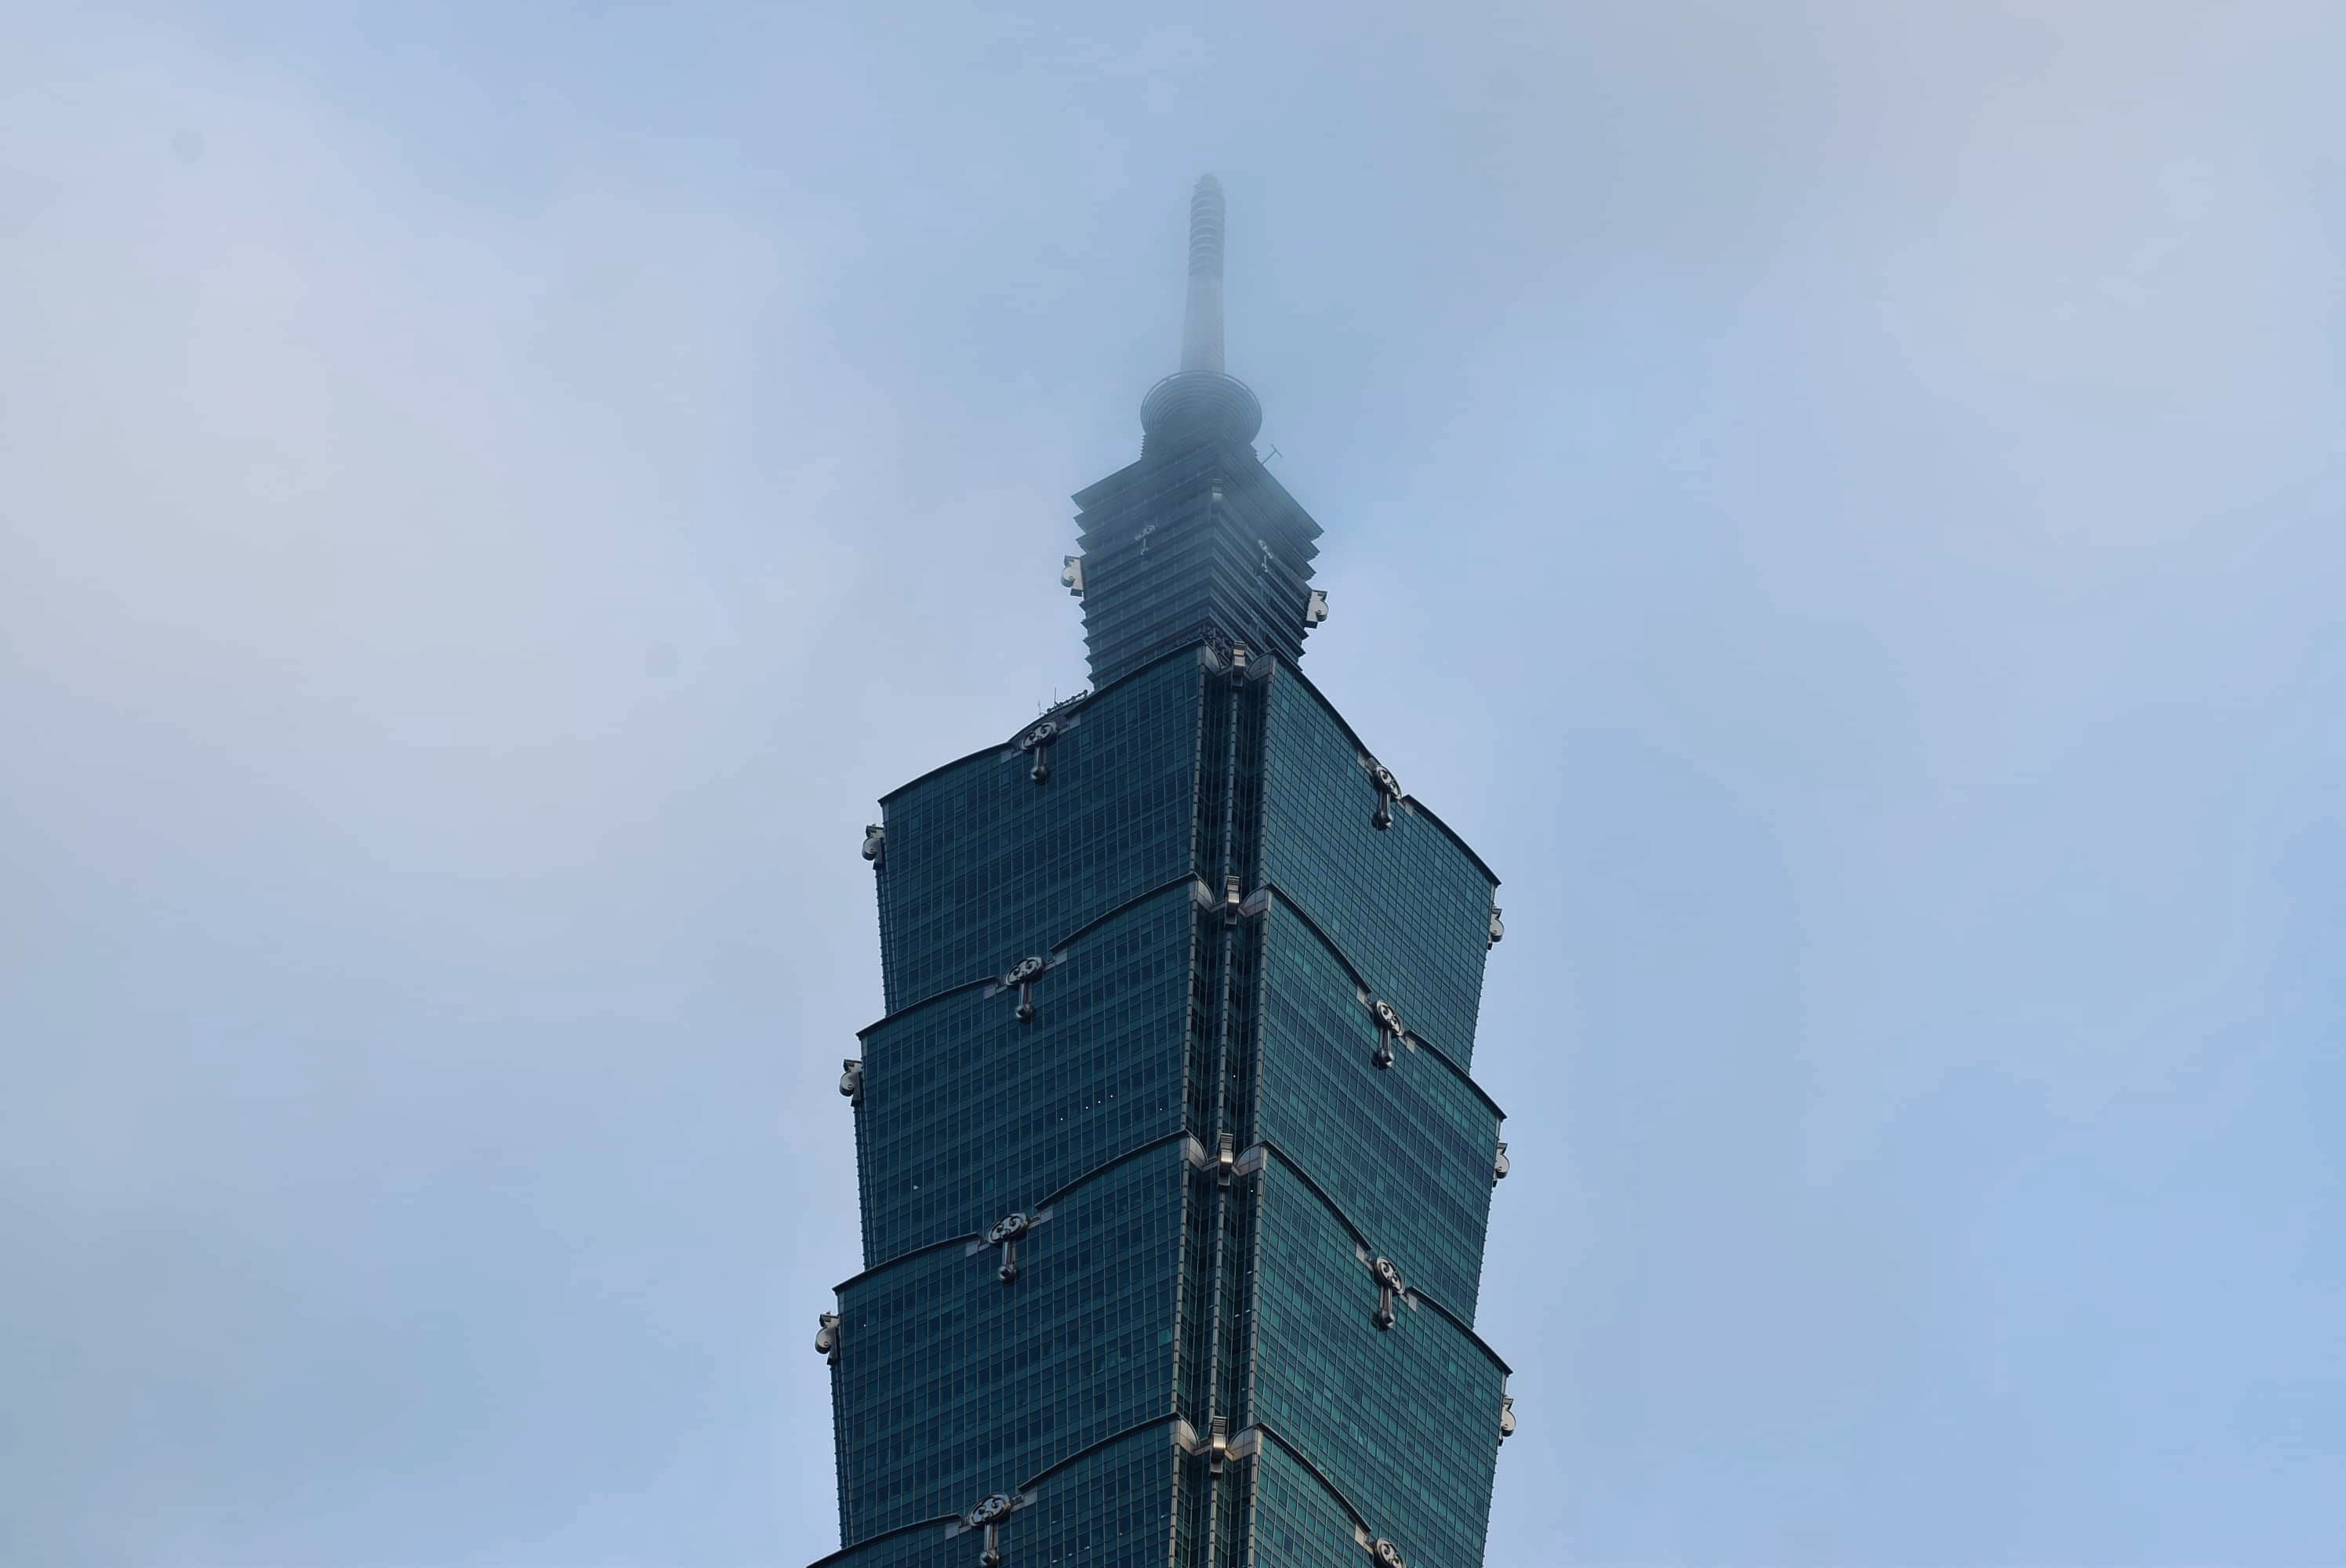 Cloud ate up the top of Taipei 101